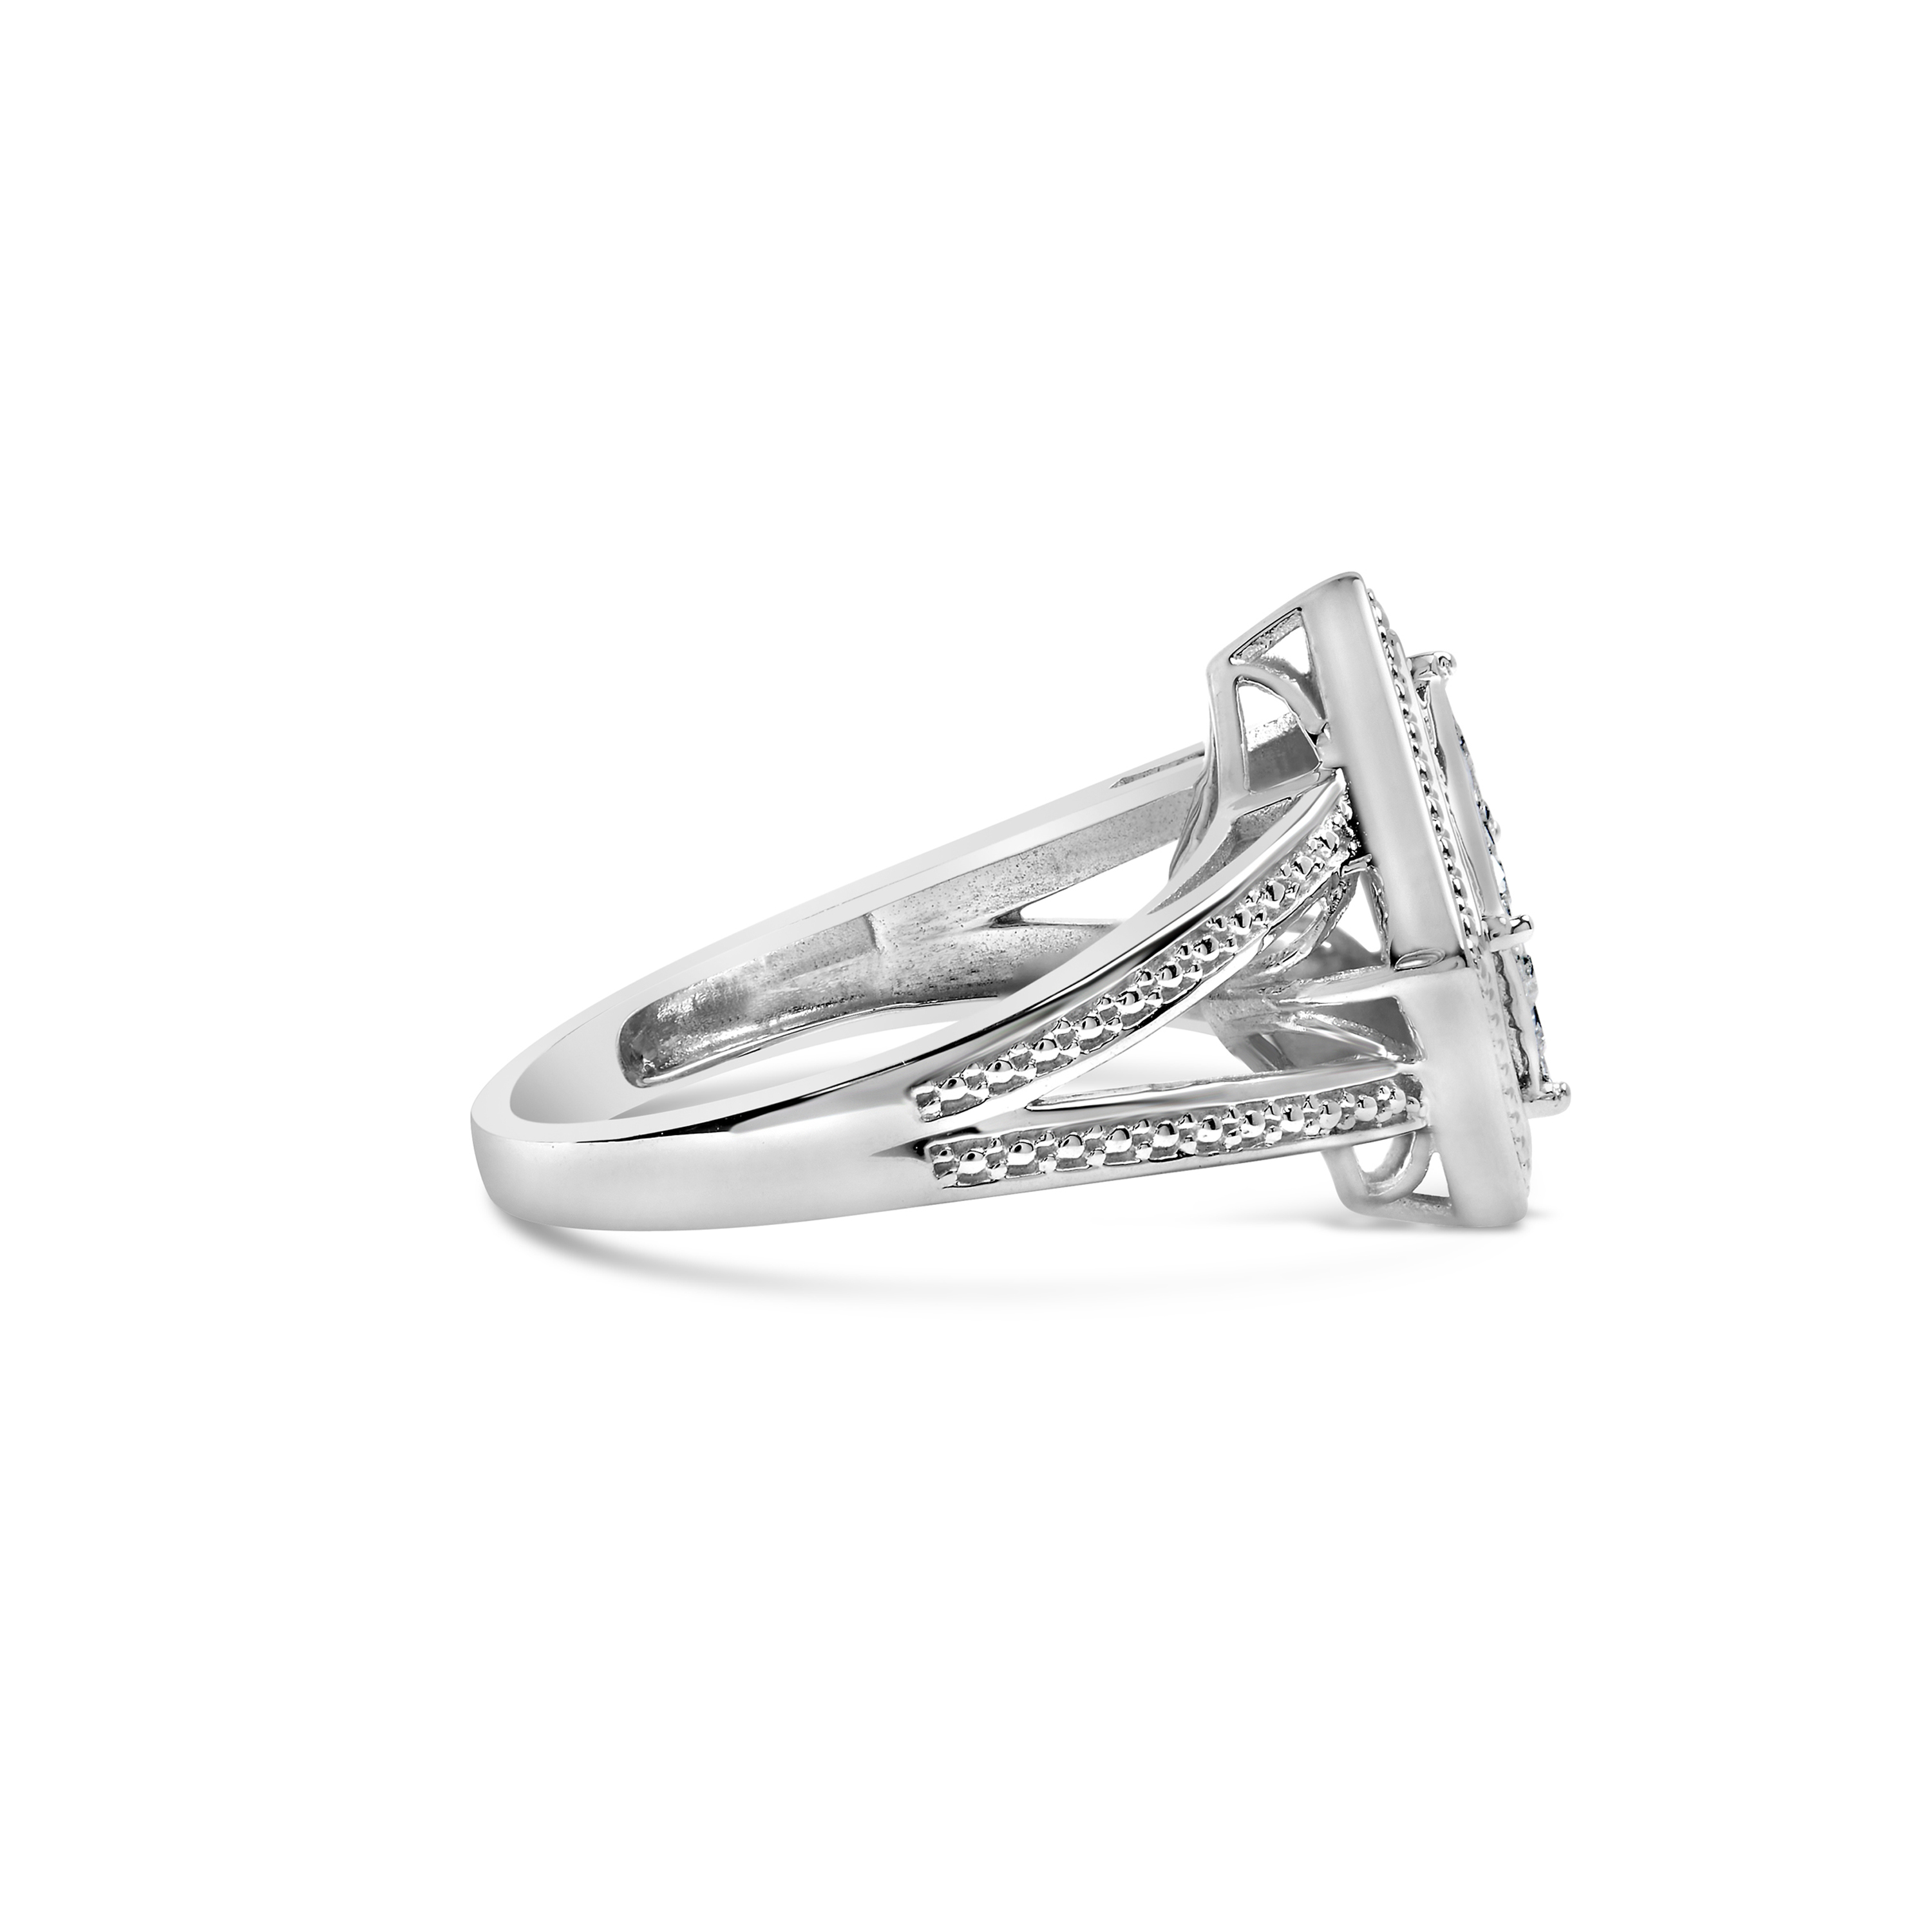 Haus of Brilliance Sterling Silver 1/3ct TDW Princess-Cut Diamond Ring (H-I,SI1-SI2)